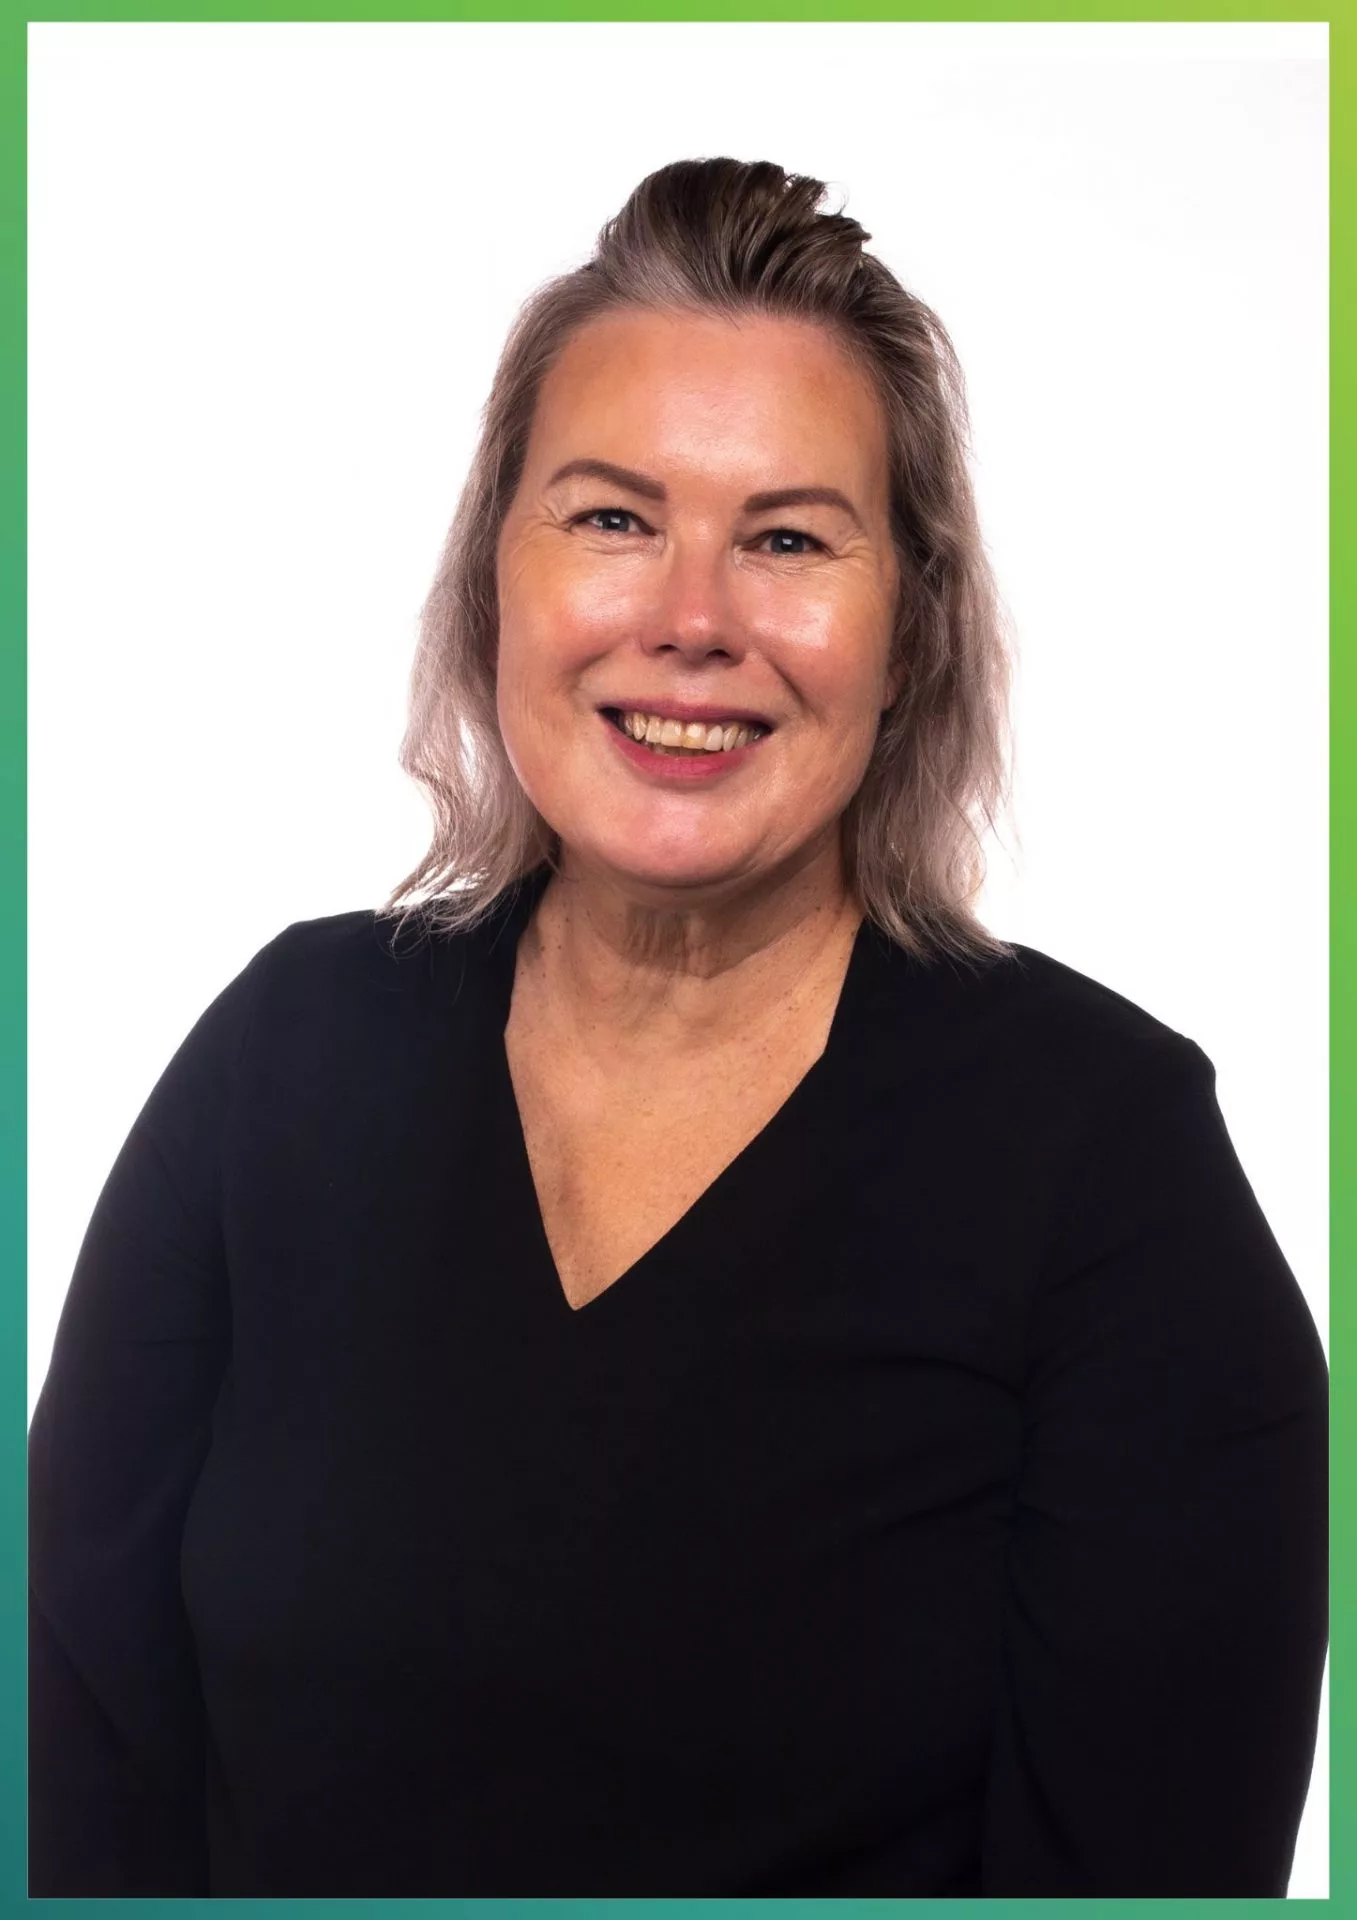 Photo of Sandra Paterson - Inclusee Ltd Connection Support Officer